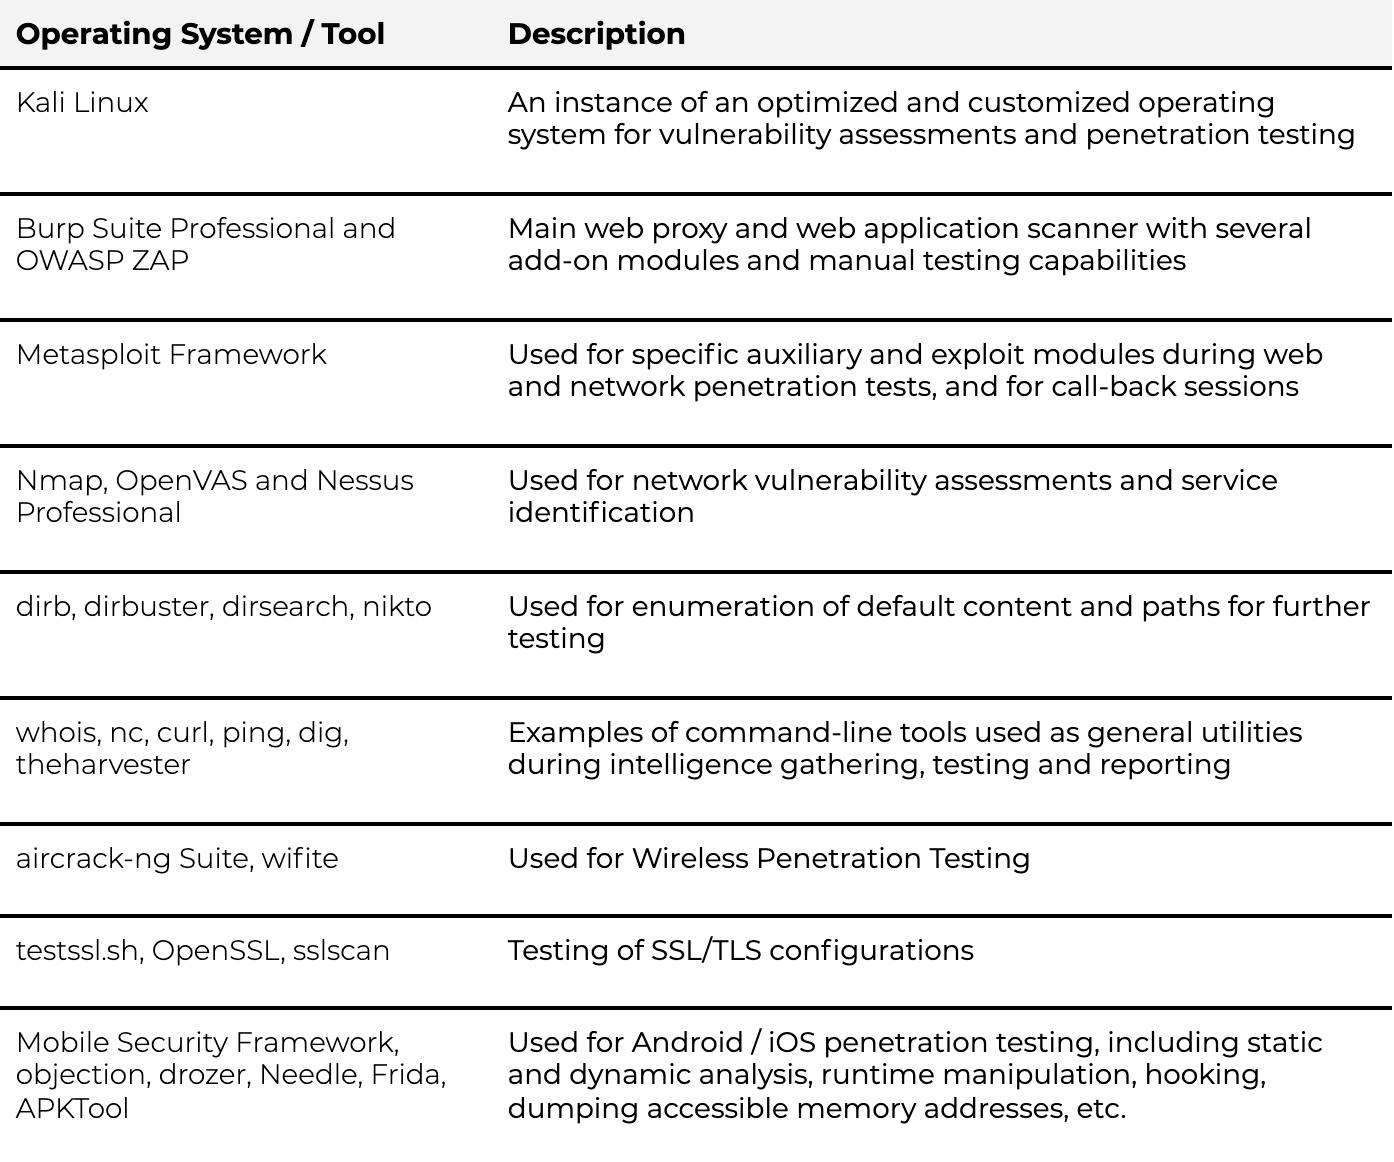 Table of operating systems and security tools